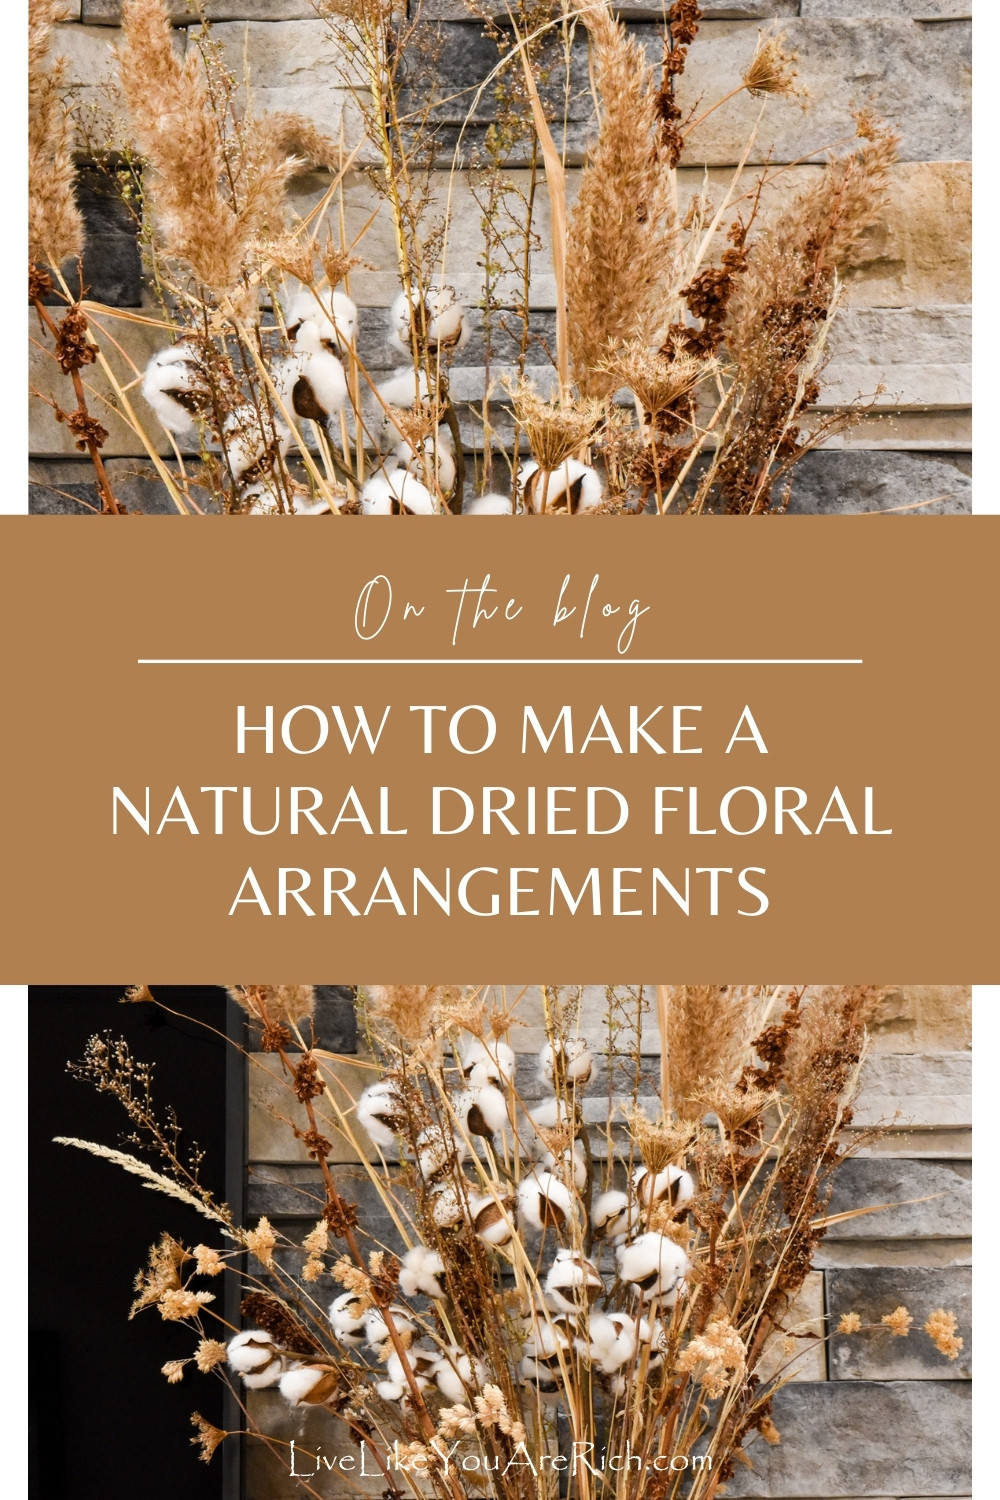 How to Make a Natural Dried Floral Arrangements